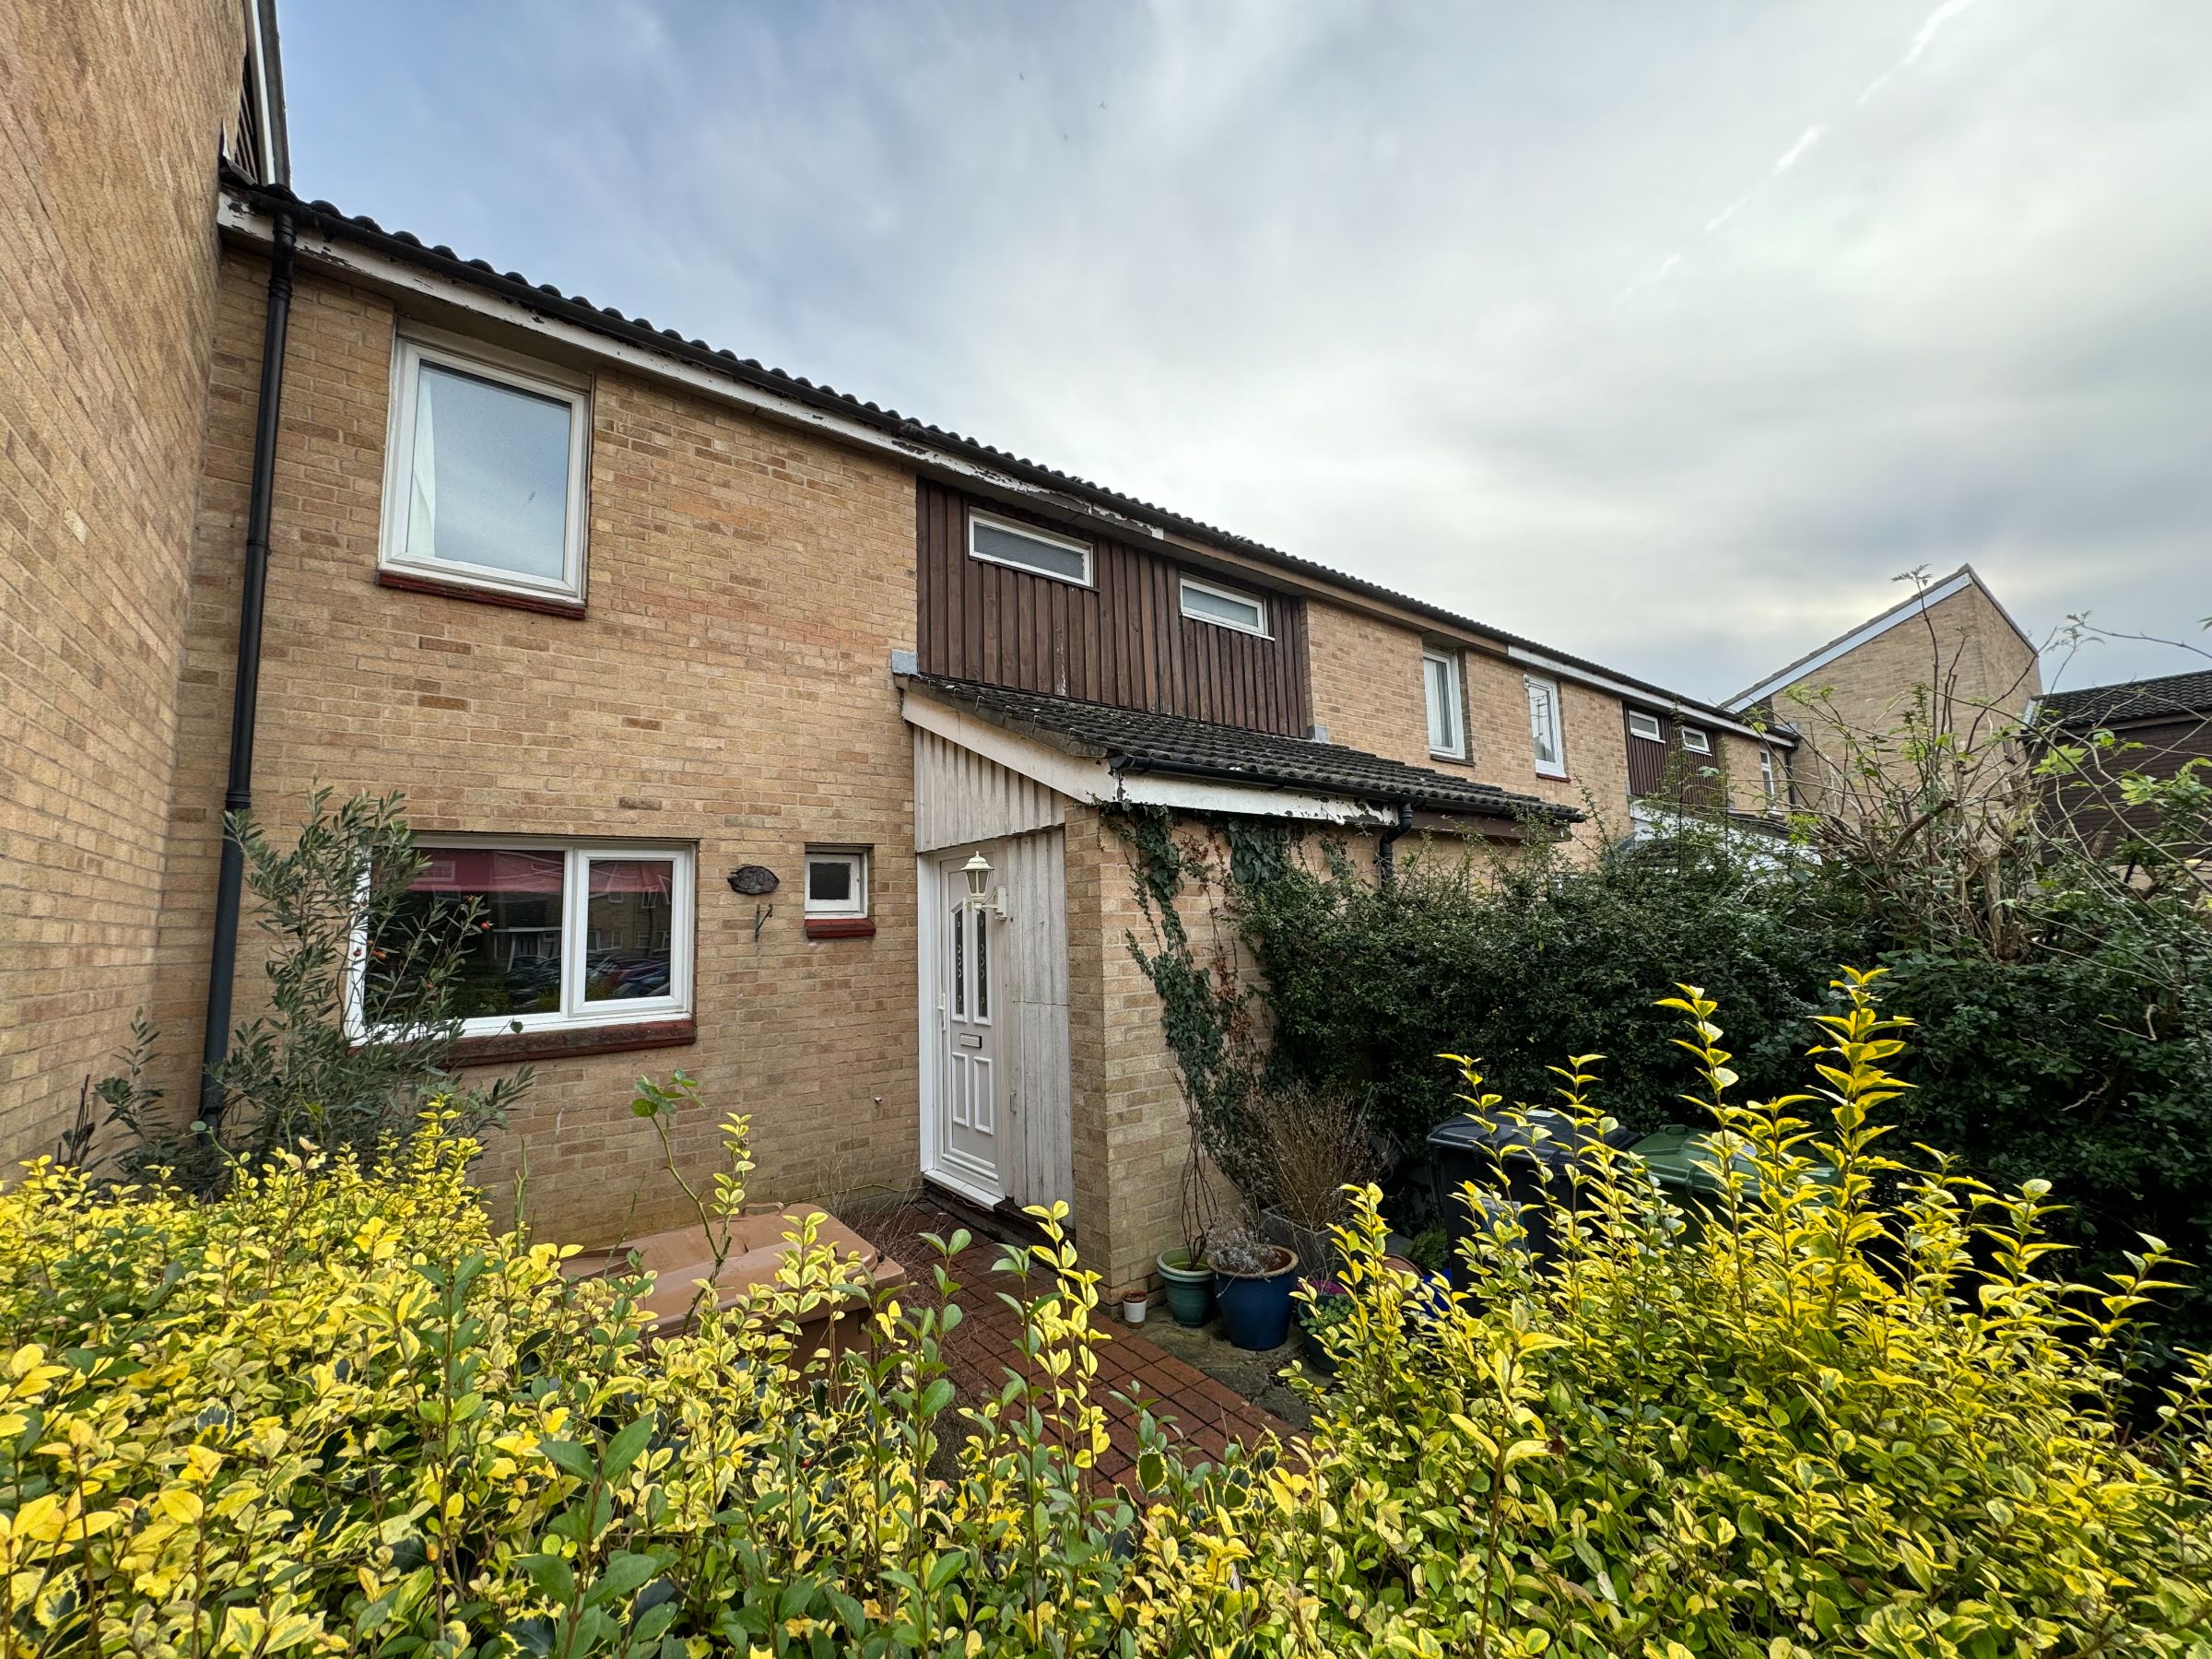 3 bed terraced house for sale in Manton, Peterborough  - Property Image 1